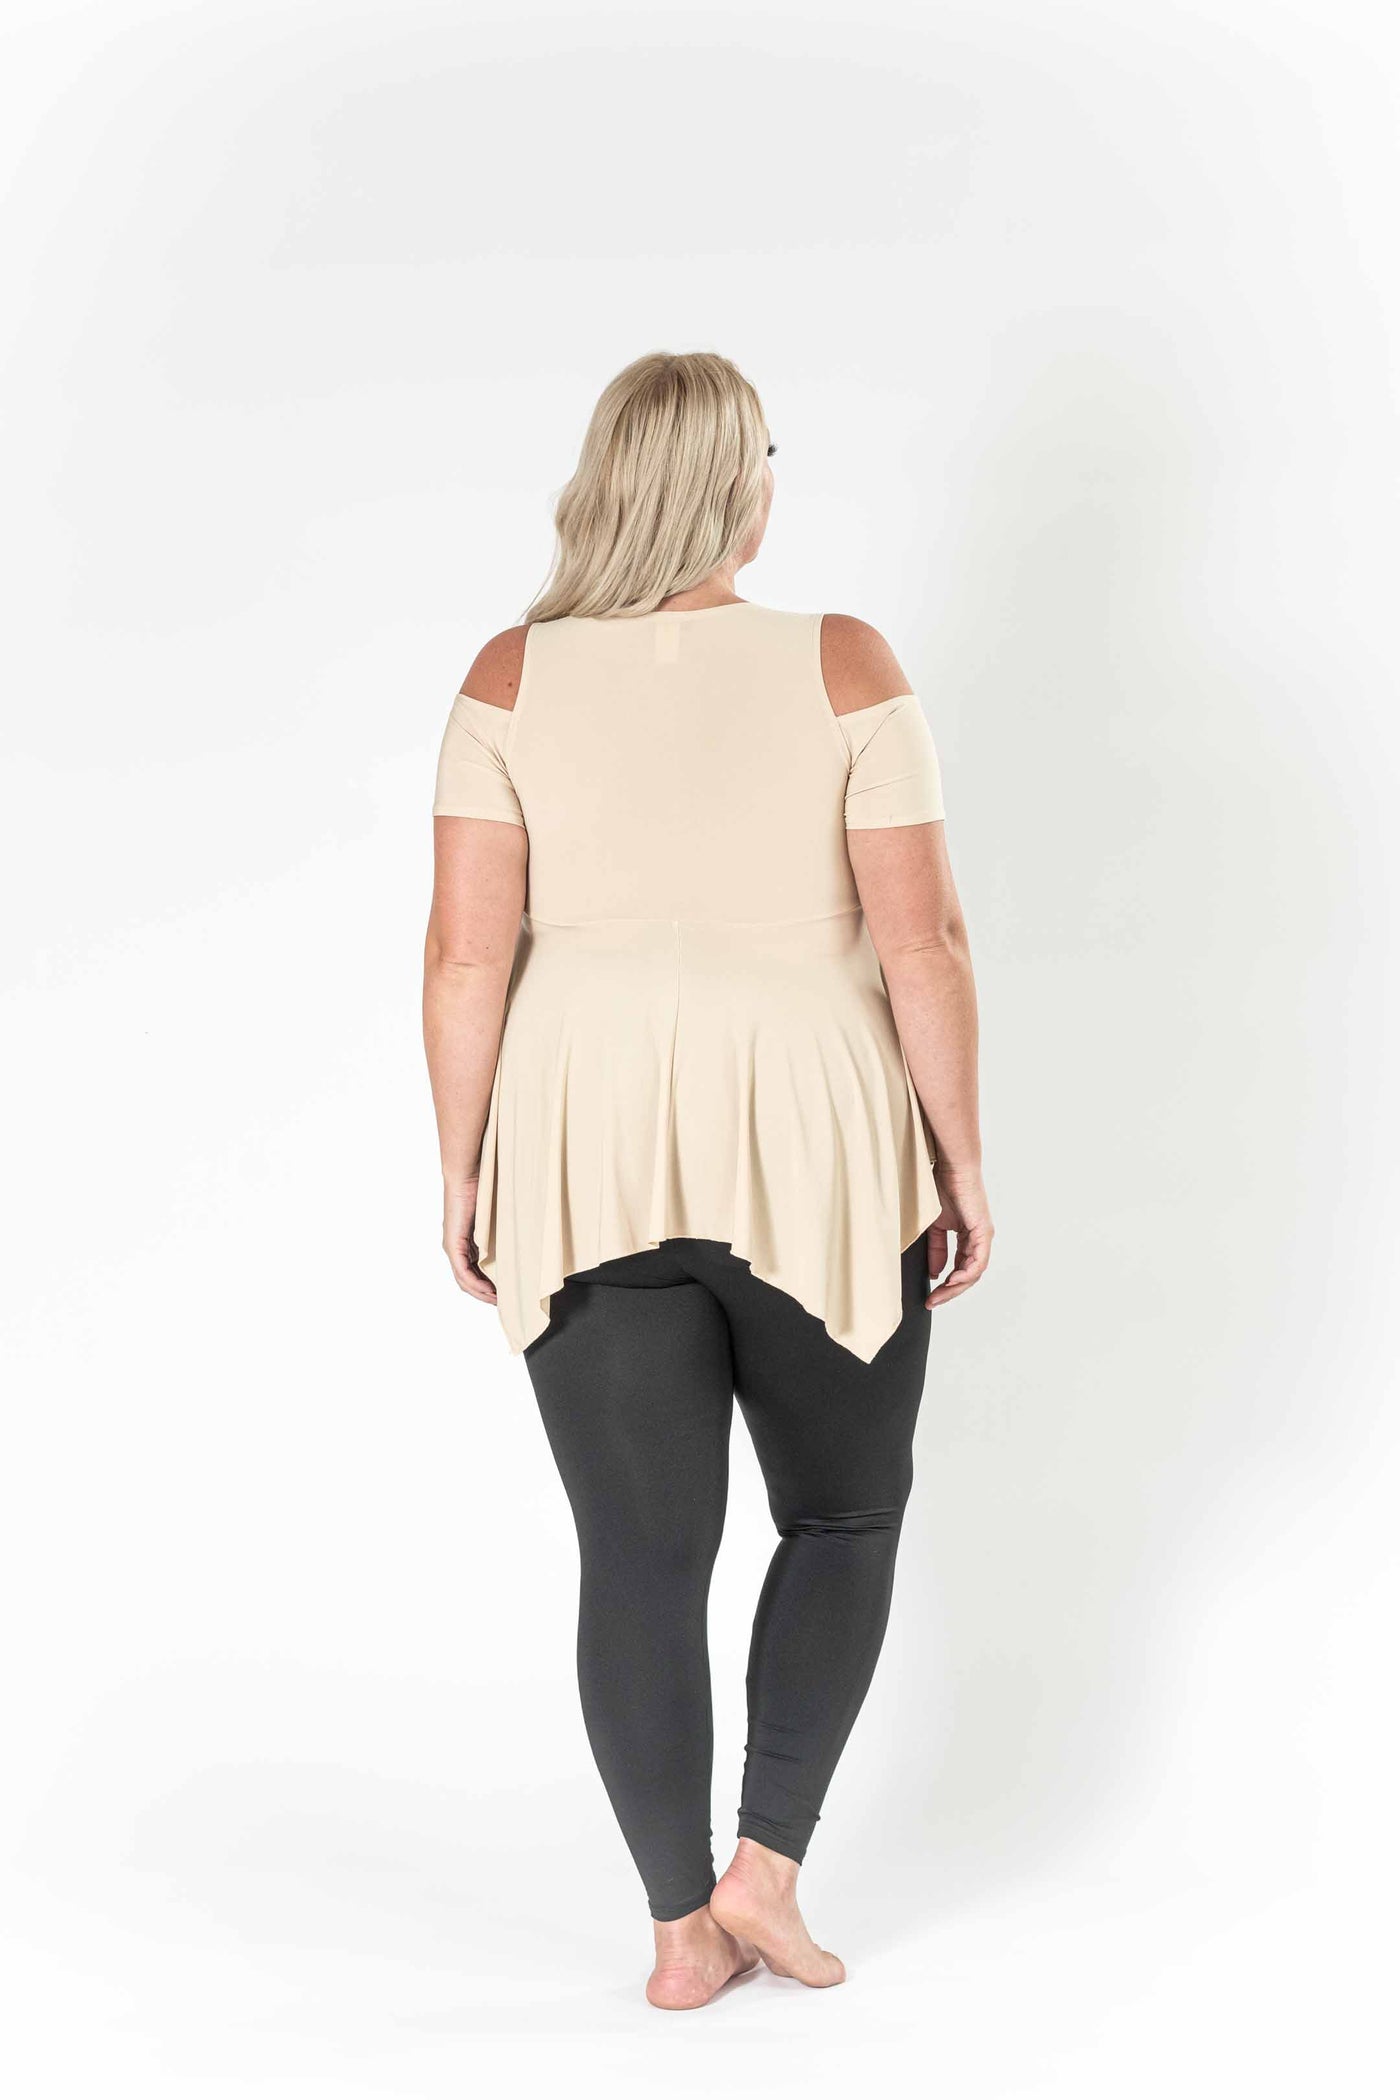 The Caramel Sexy Shoulders Top